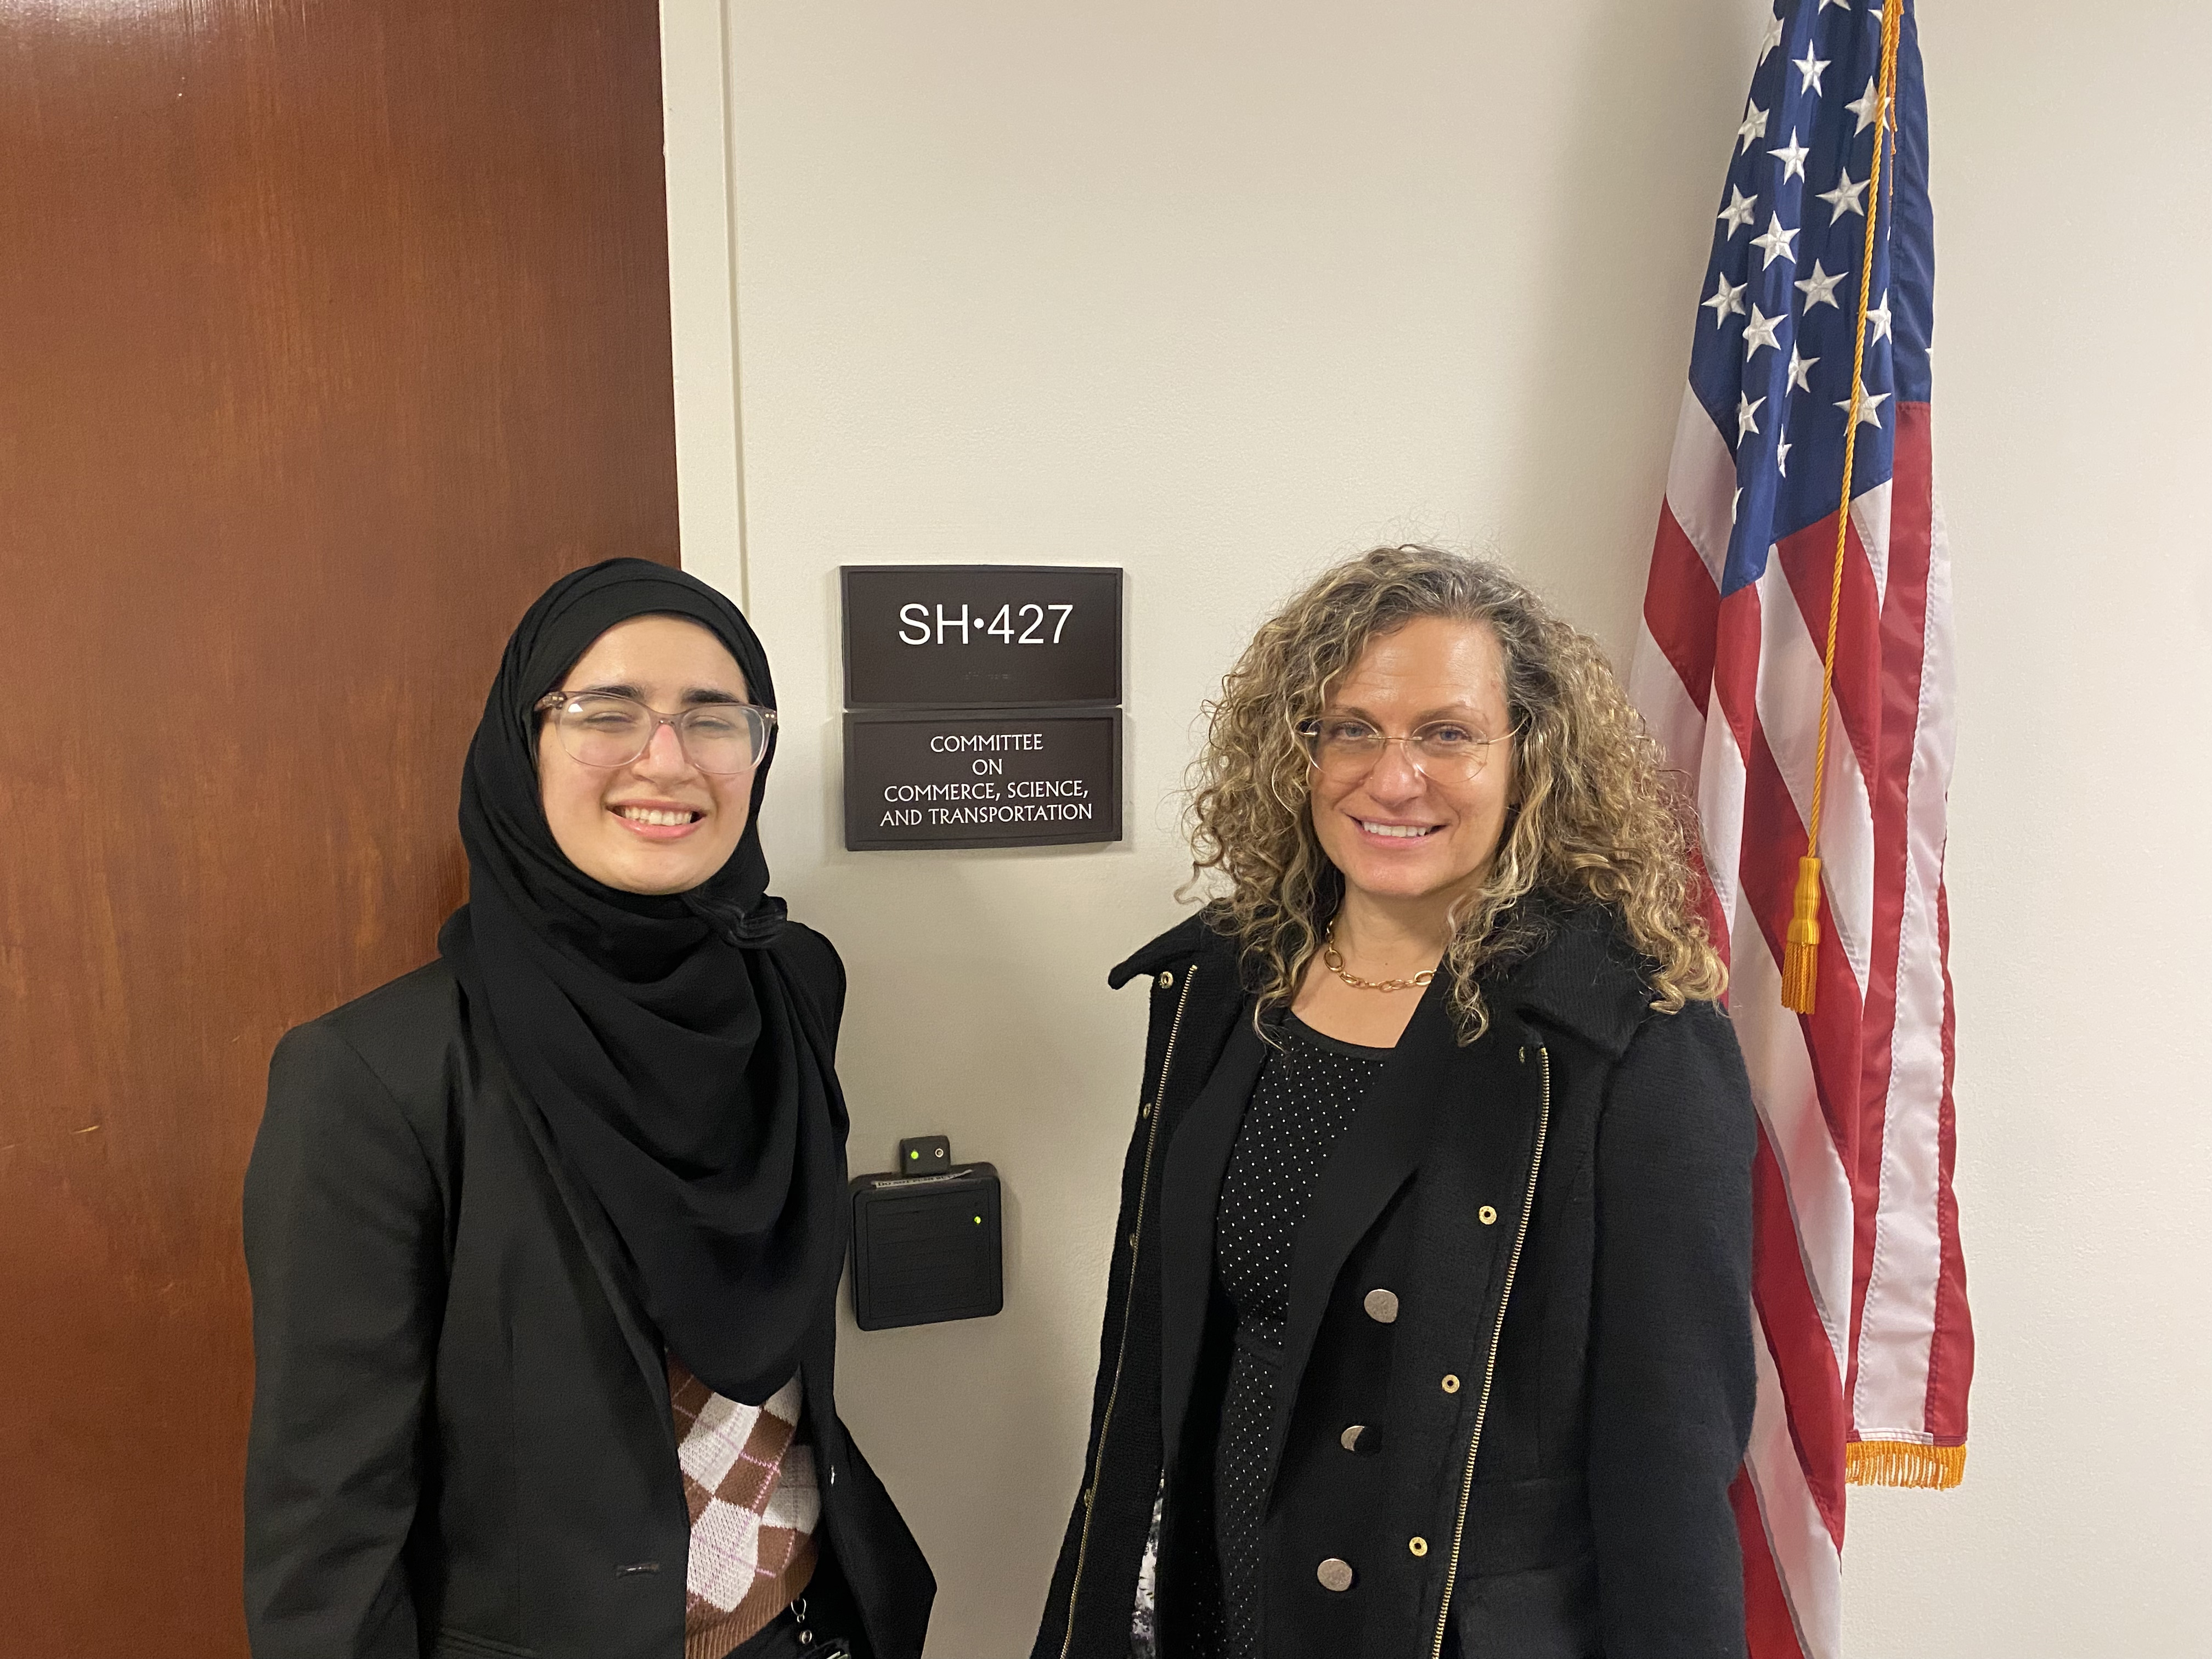 ITS alum Rukia Hassoun, Air Grant Fellow, US Senate Committee on Commerce, Science, and Transportation with ITS Assistant Director Laura Melendy